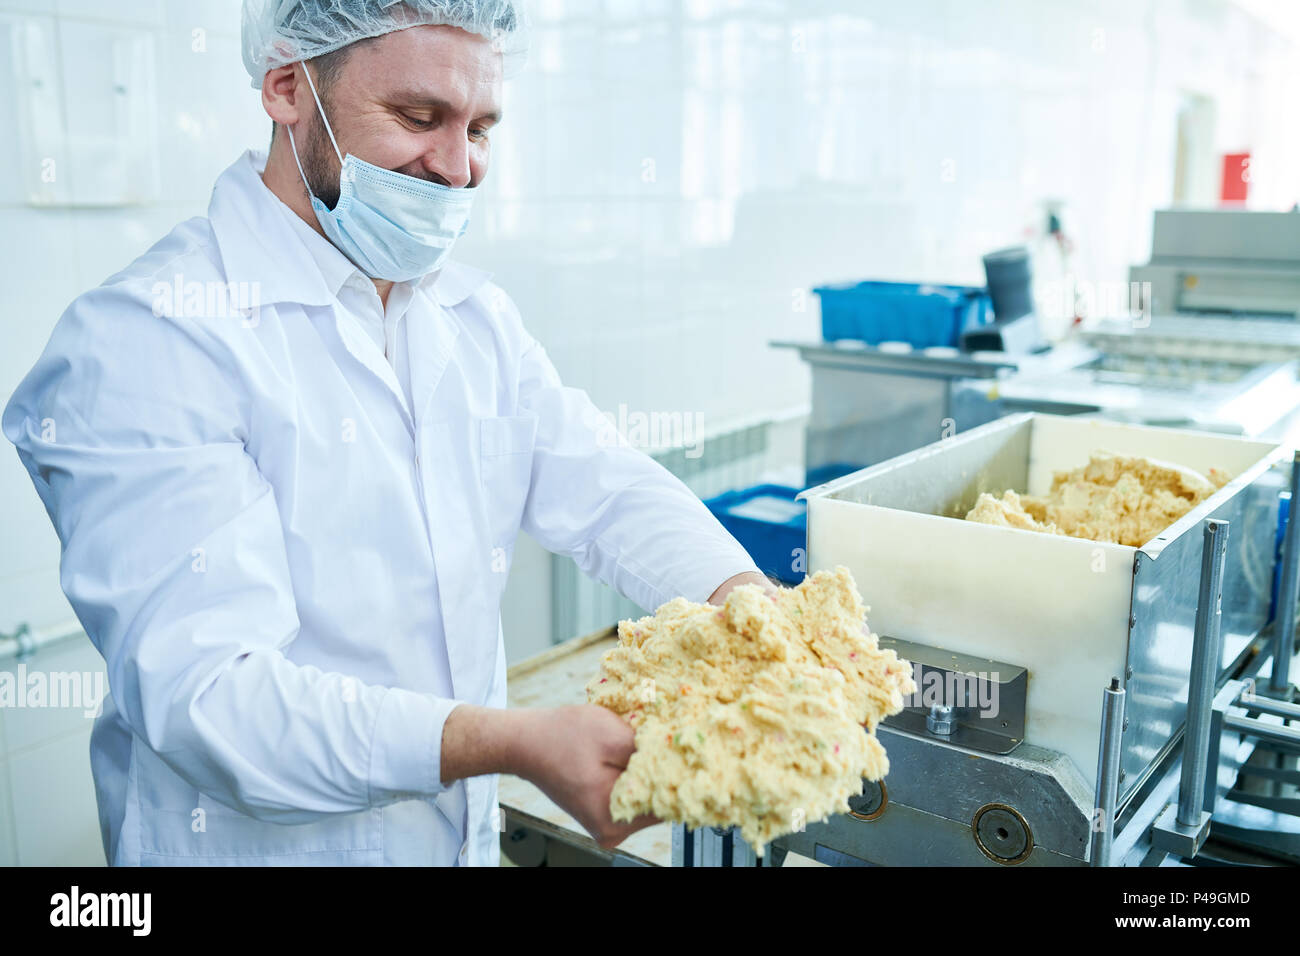 Confectioner in professional uniform holding dough Stock Photo